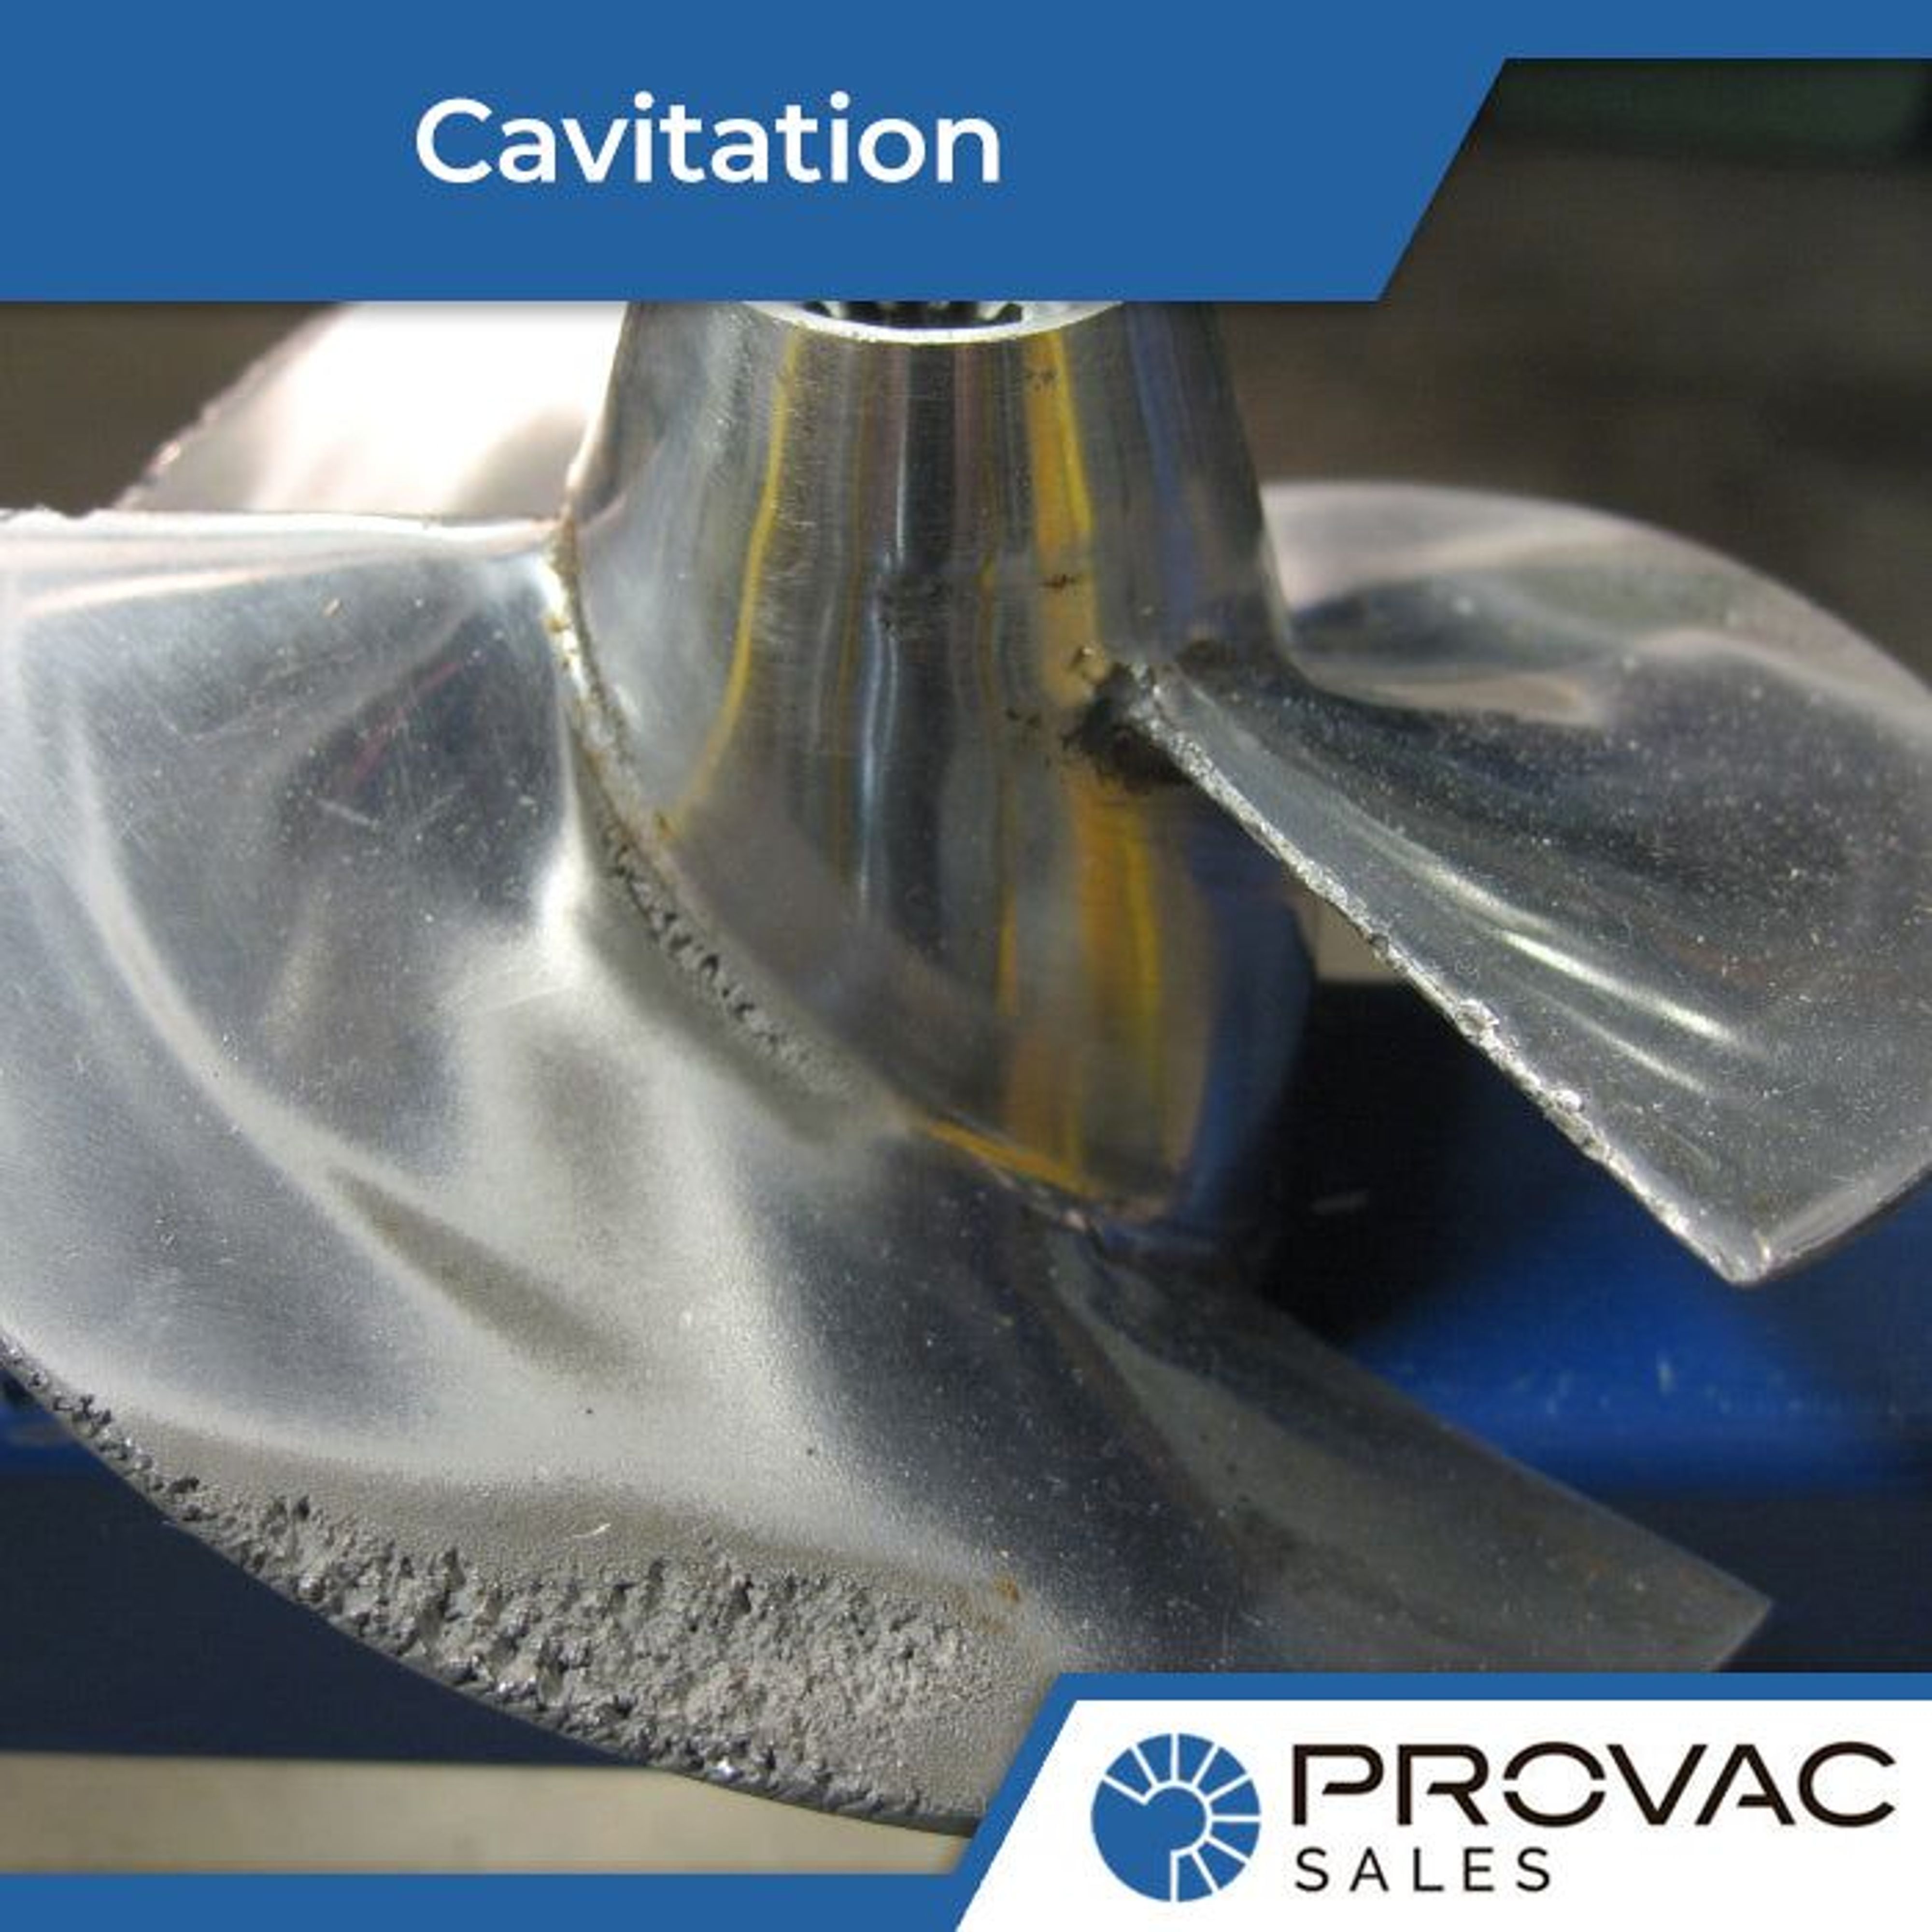 Cavitation In Pumps: Potential Causes & Solutions Background